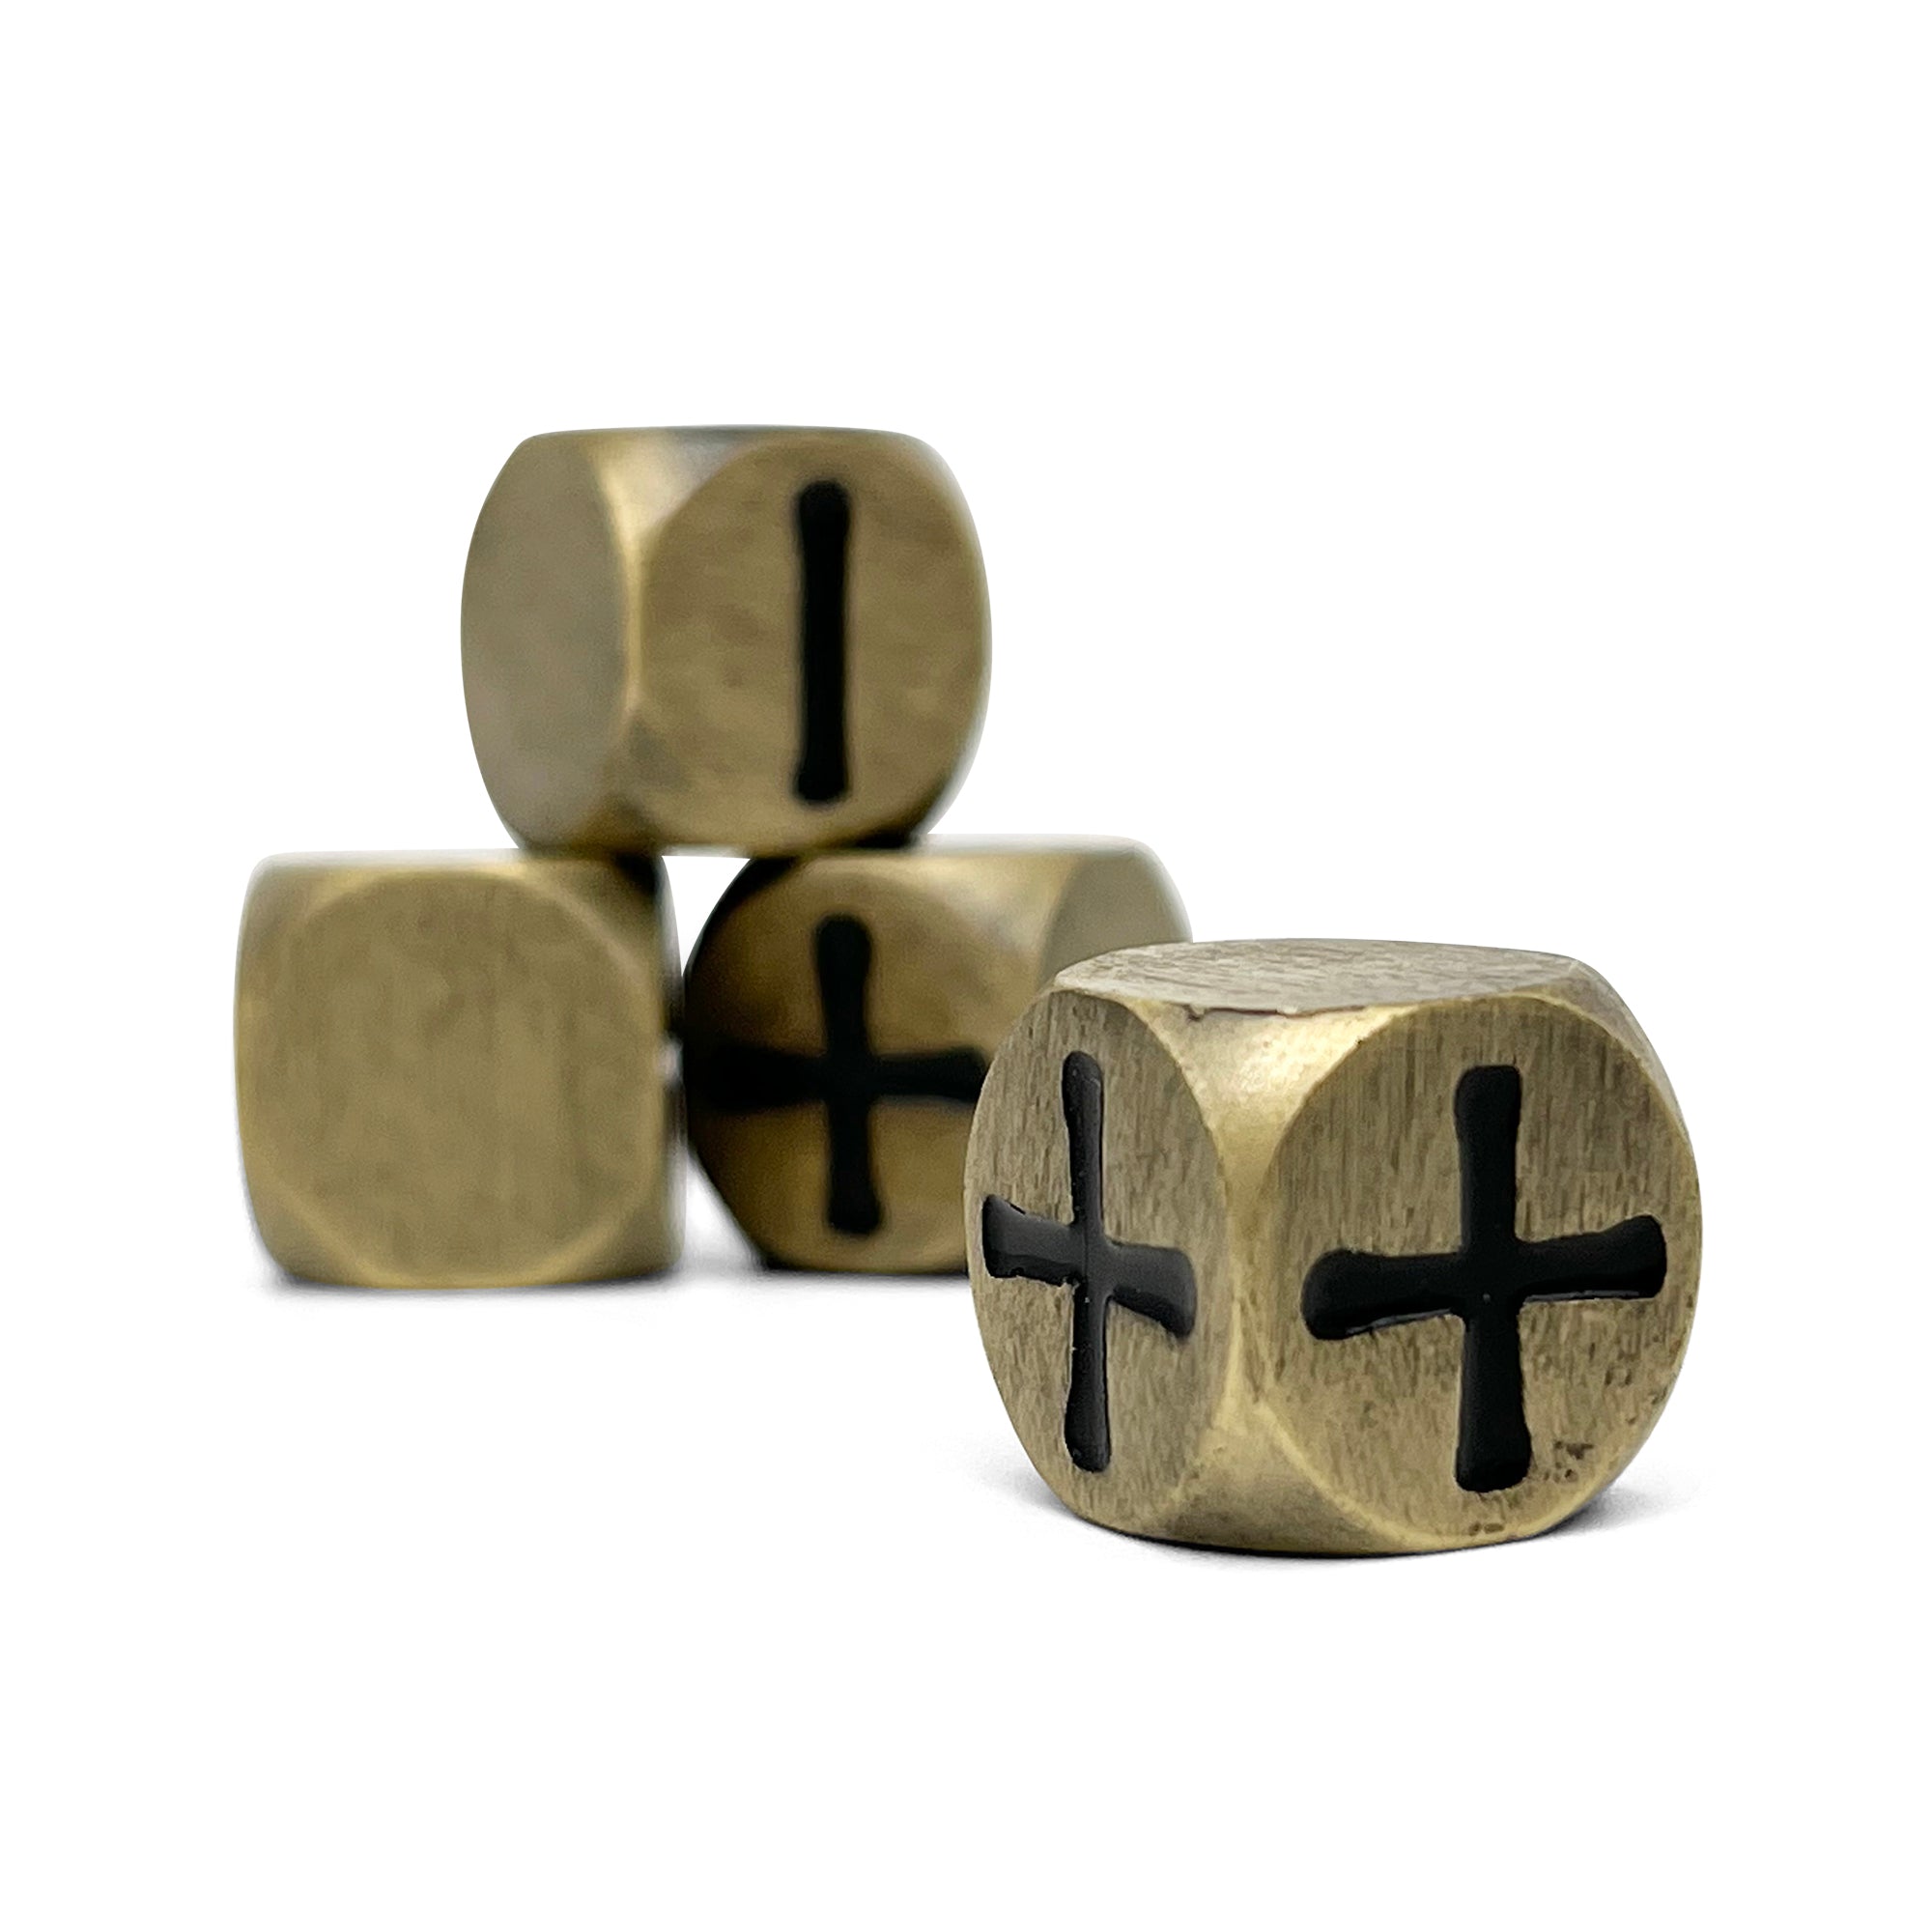 Fate Dice – Bronze Dragon Scale Pack of 4 Metal Dice